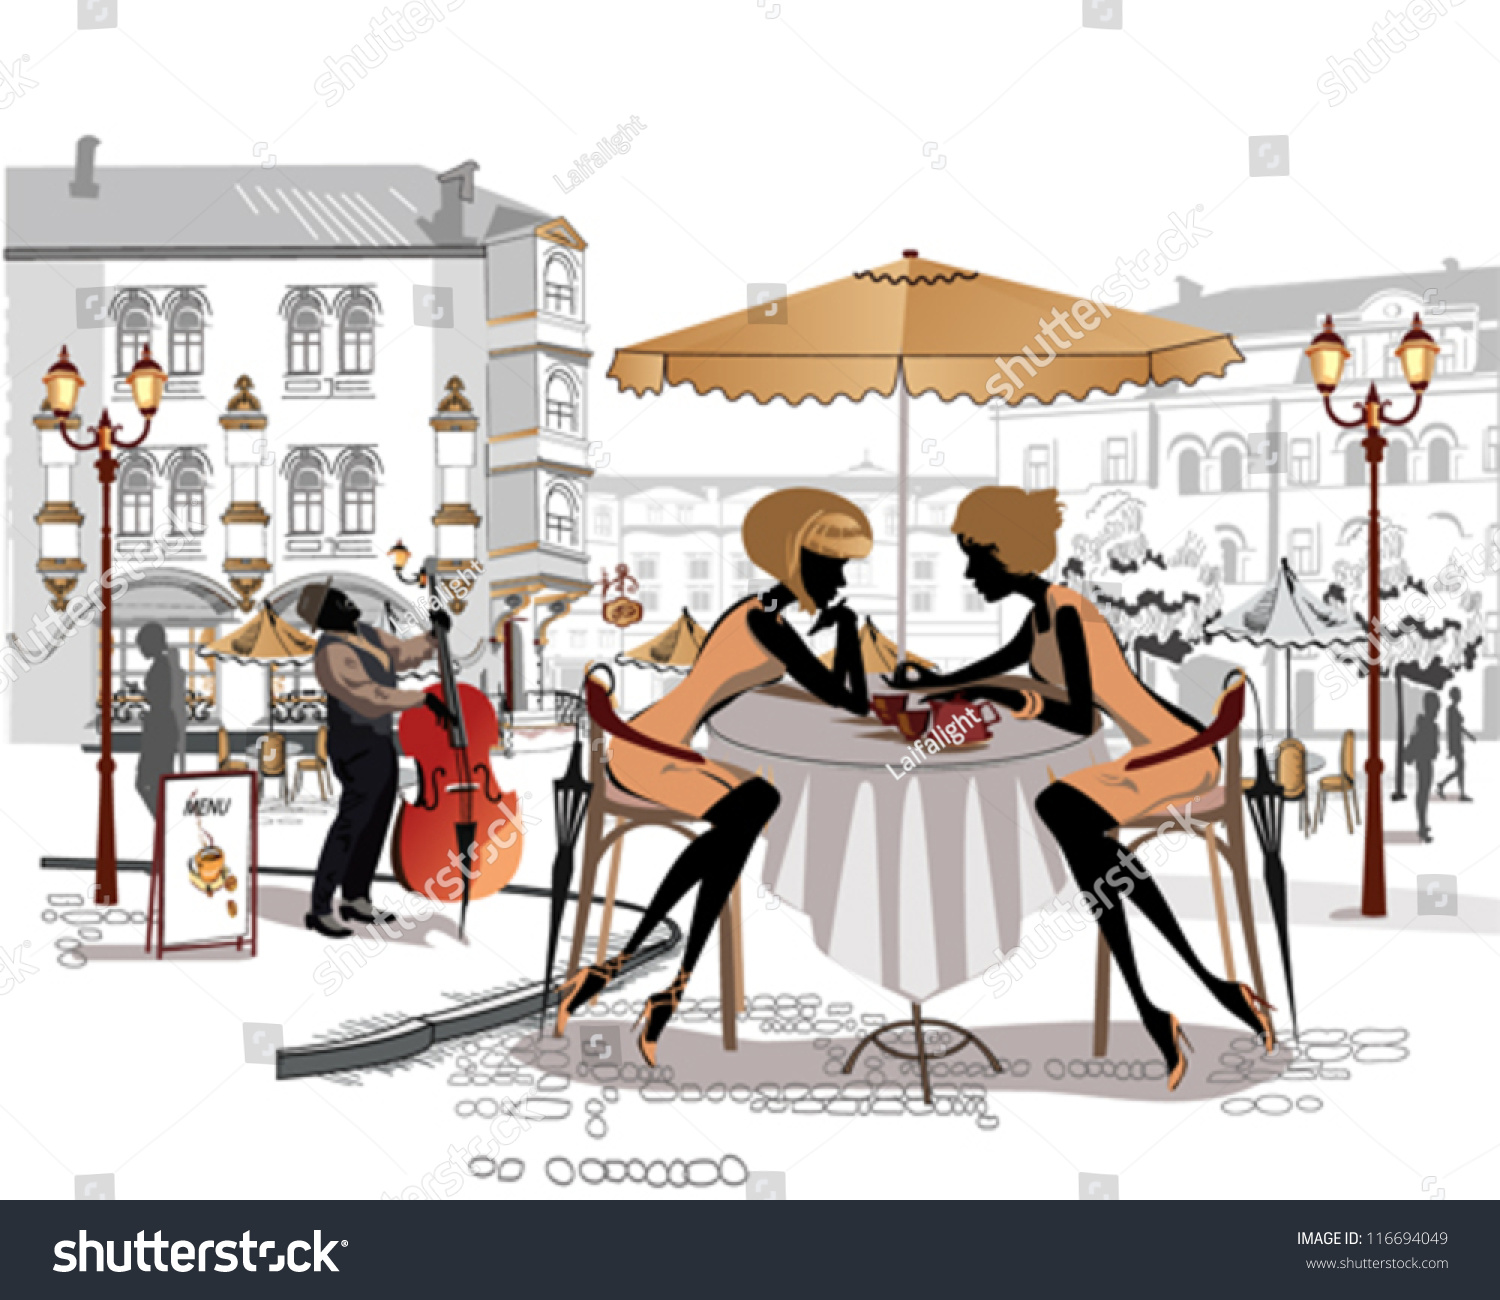 Chatting Girls Musician Street Cafe Old Stock Vector 116694049 ...